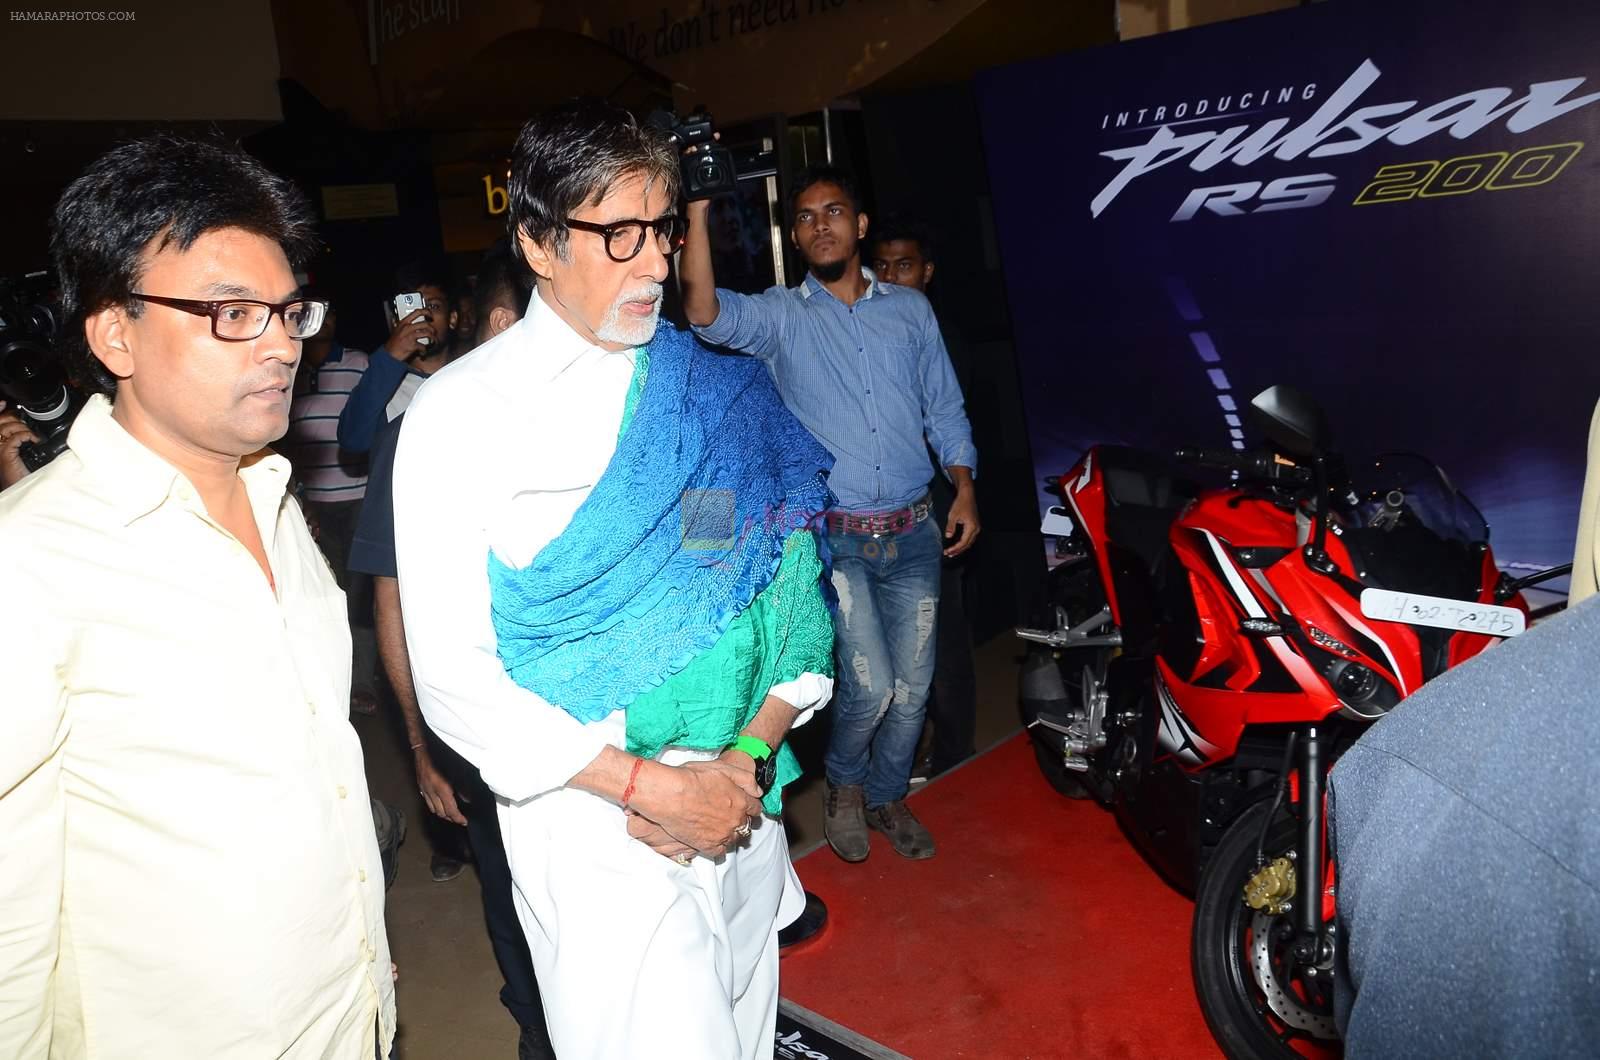 Amitabh bachchan at Wazir Trailer Launch at PVR juhu on 3rd June 2015